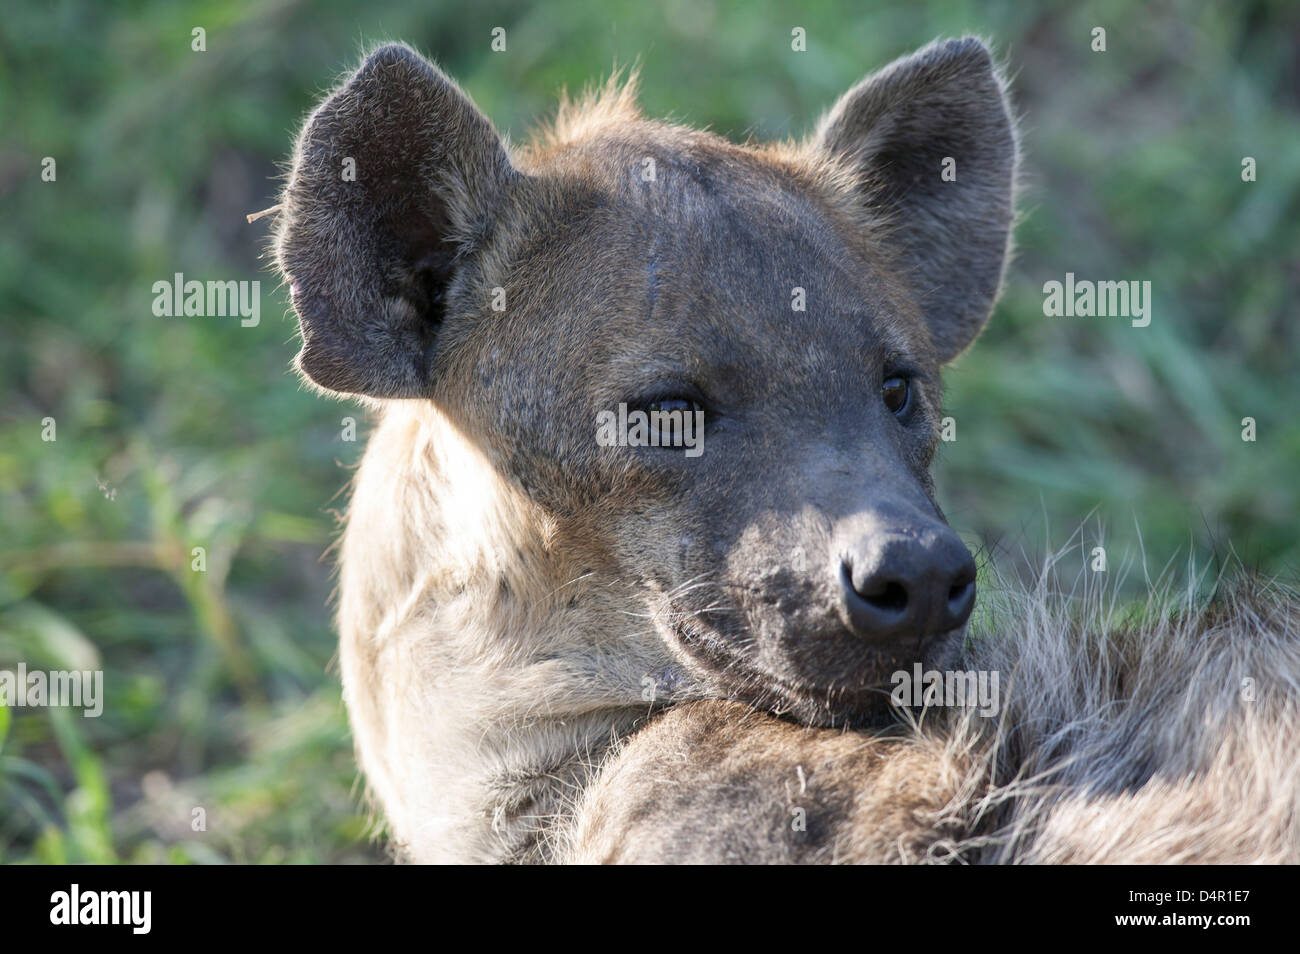 Close up of a Spotted hyena Crocuta crocuta laughing hyena looking over its shoulder Stock Photo